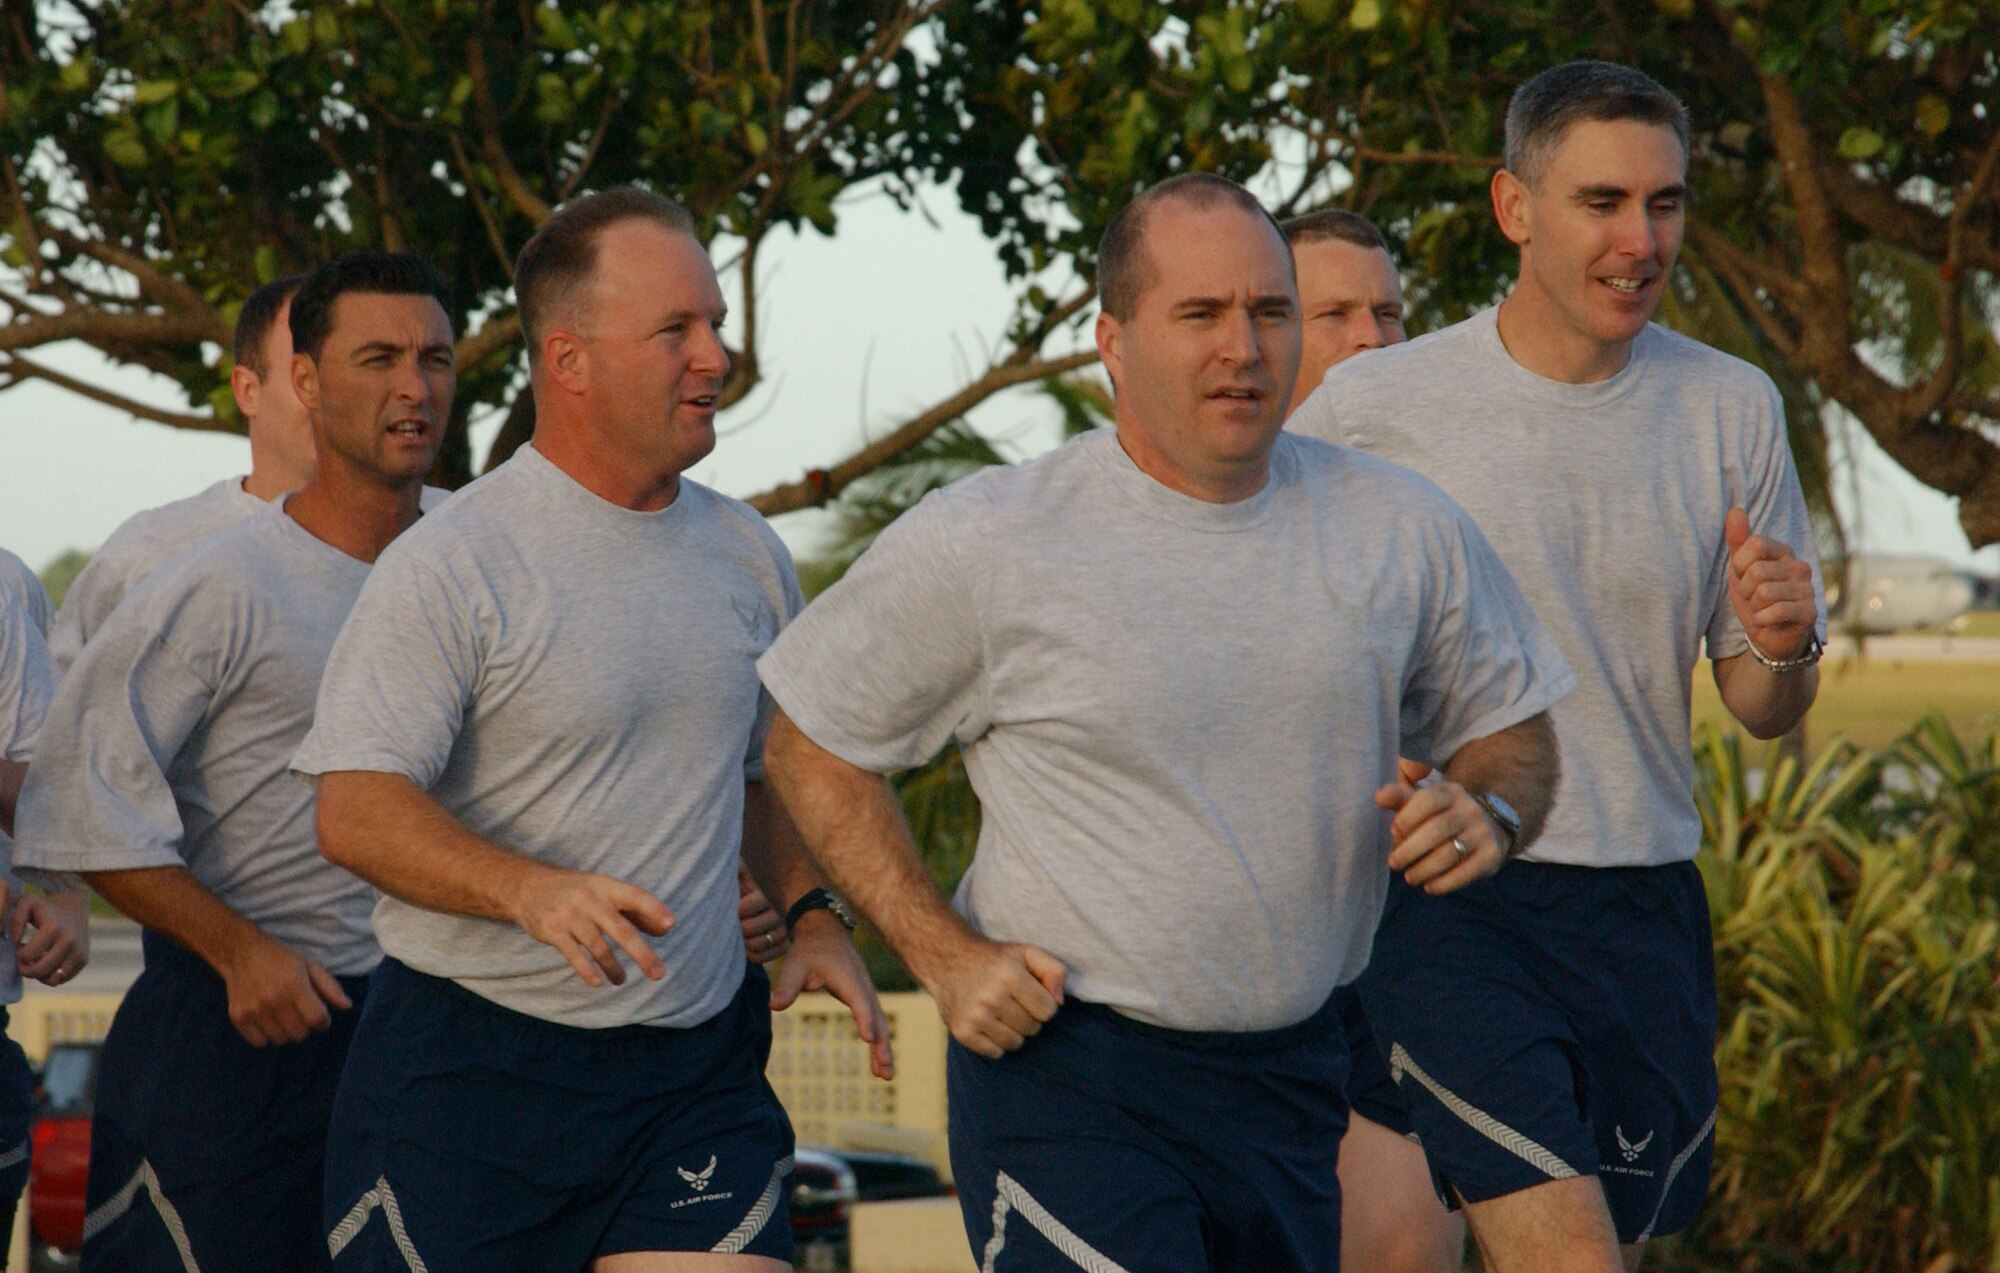 Col. Damian McCarthy, 36th Operations Group commander (center) and Lt. Col. John Vitacca, 393rd Expeditionary Bomb Squadron commander (right) lead the operations group flight on the wing run that kicked off the annual team Andersen challenge. After the run, all Airmen went back to their respective organizations and participated in various seminars aimed at health and wellness. Then, the 36th Wing began its afternoon of competitions in various events throughout the installation. (Air Force photo/Tech. Sgt. Steven Wilson) 